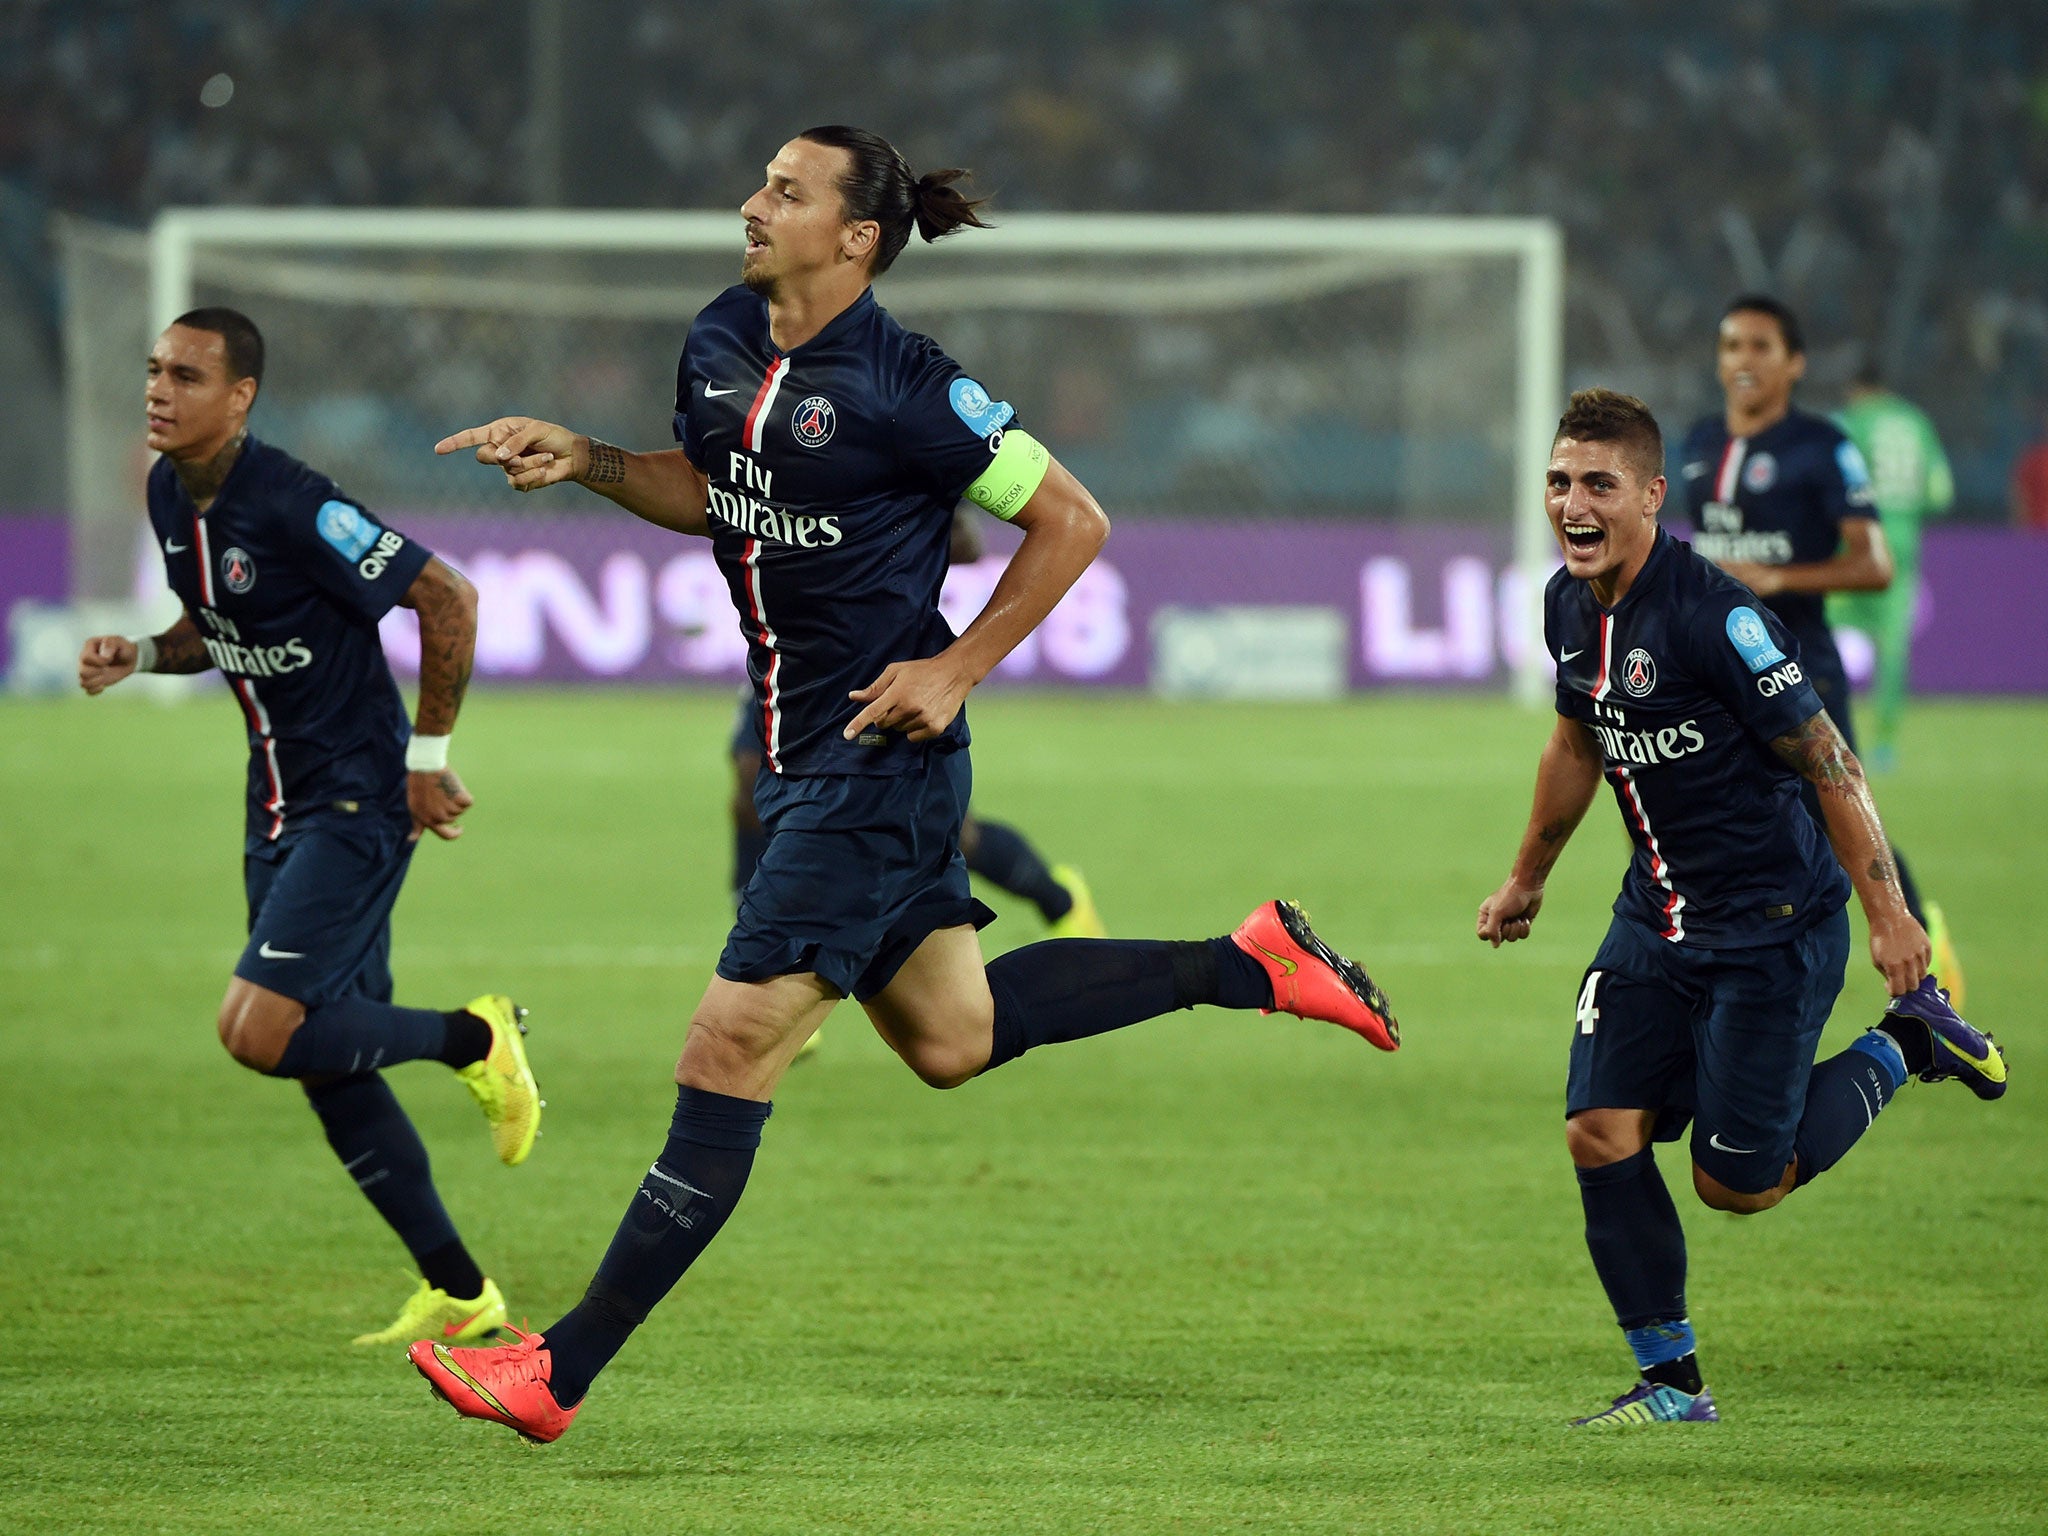 Ibrahimovic has been prolific since moving to Ligue 1